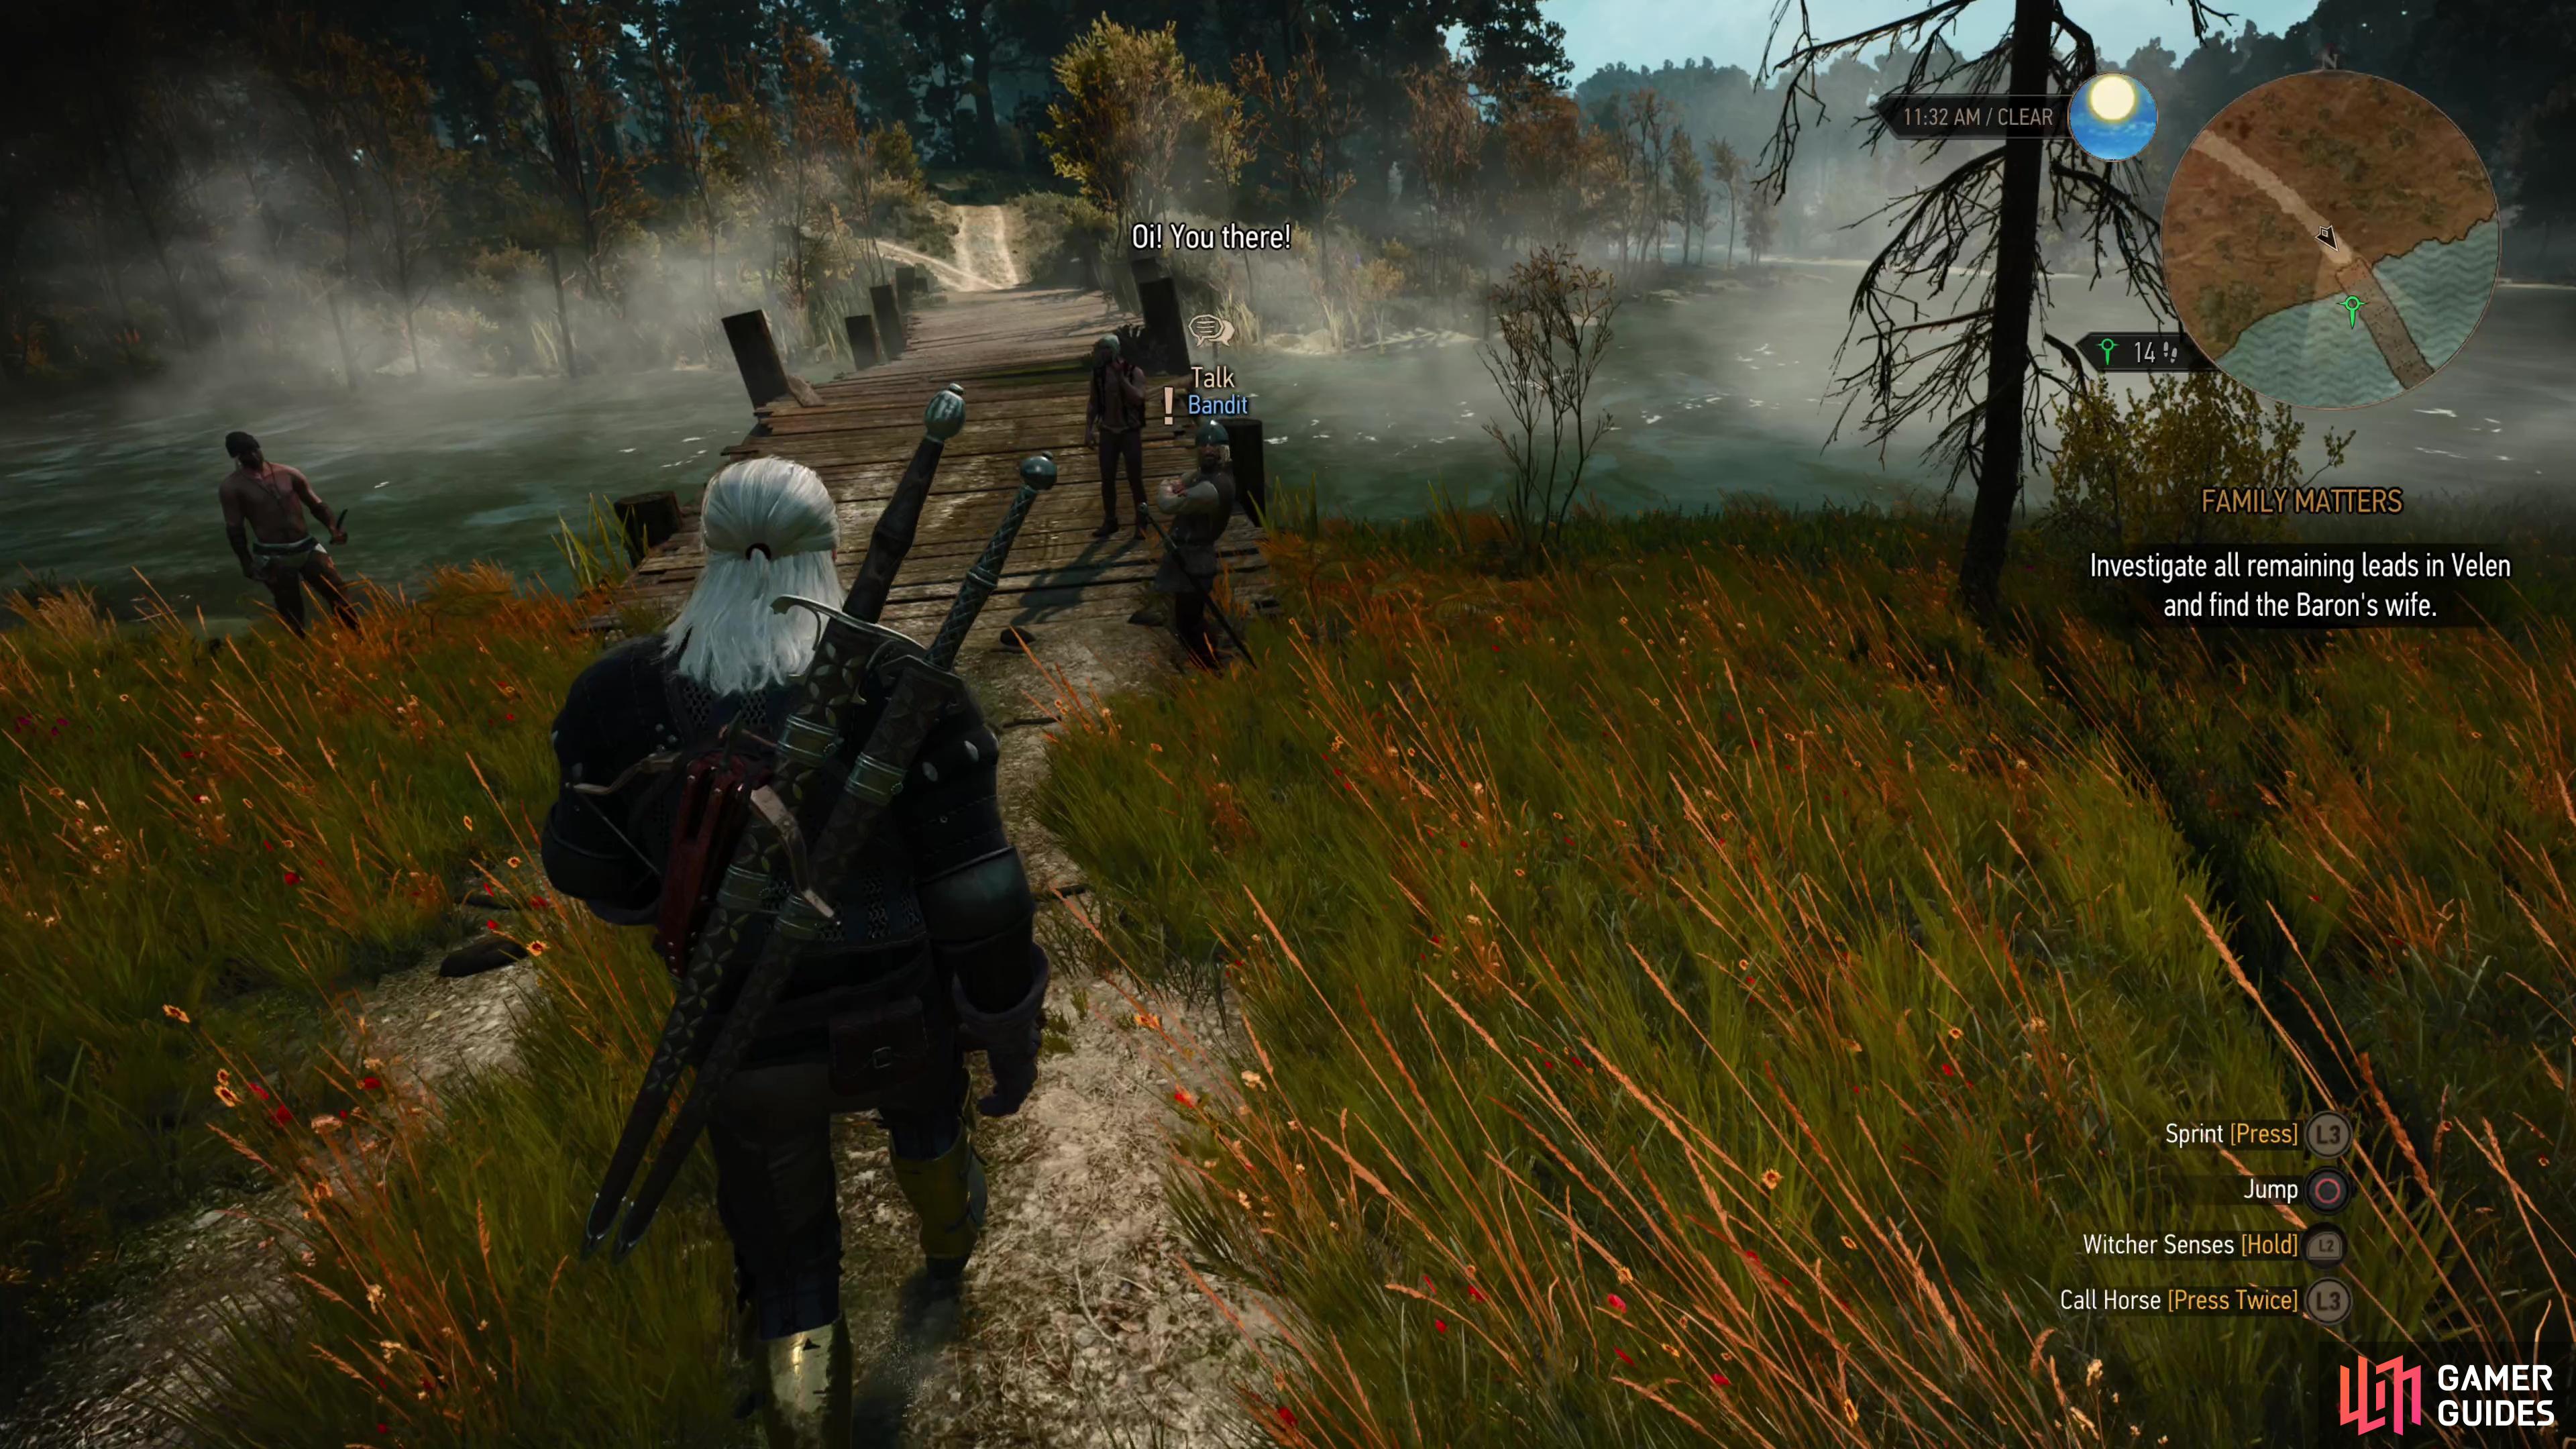 Approach the bridge east of the Boatmaker’s Hut to find some Bandits have taken control of the crossing.